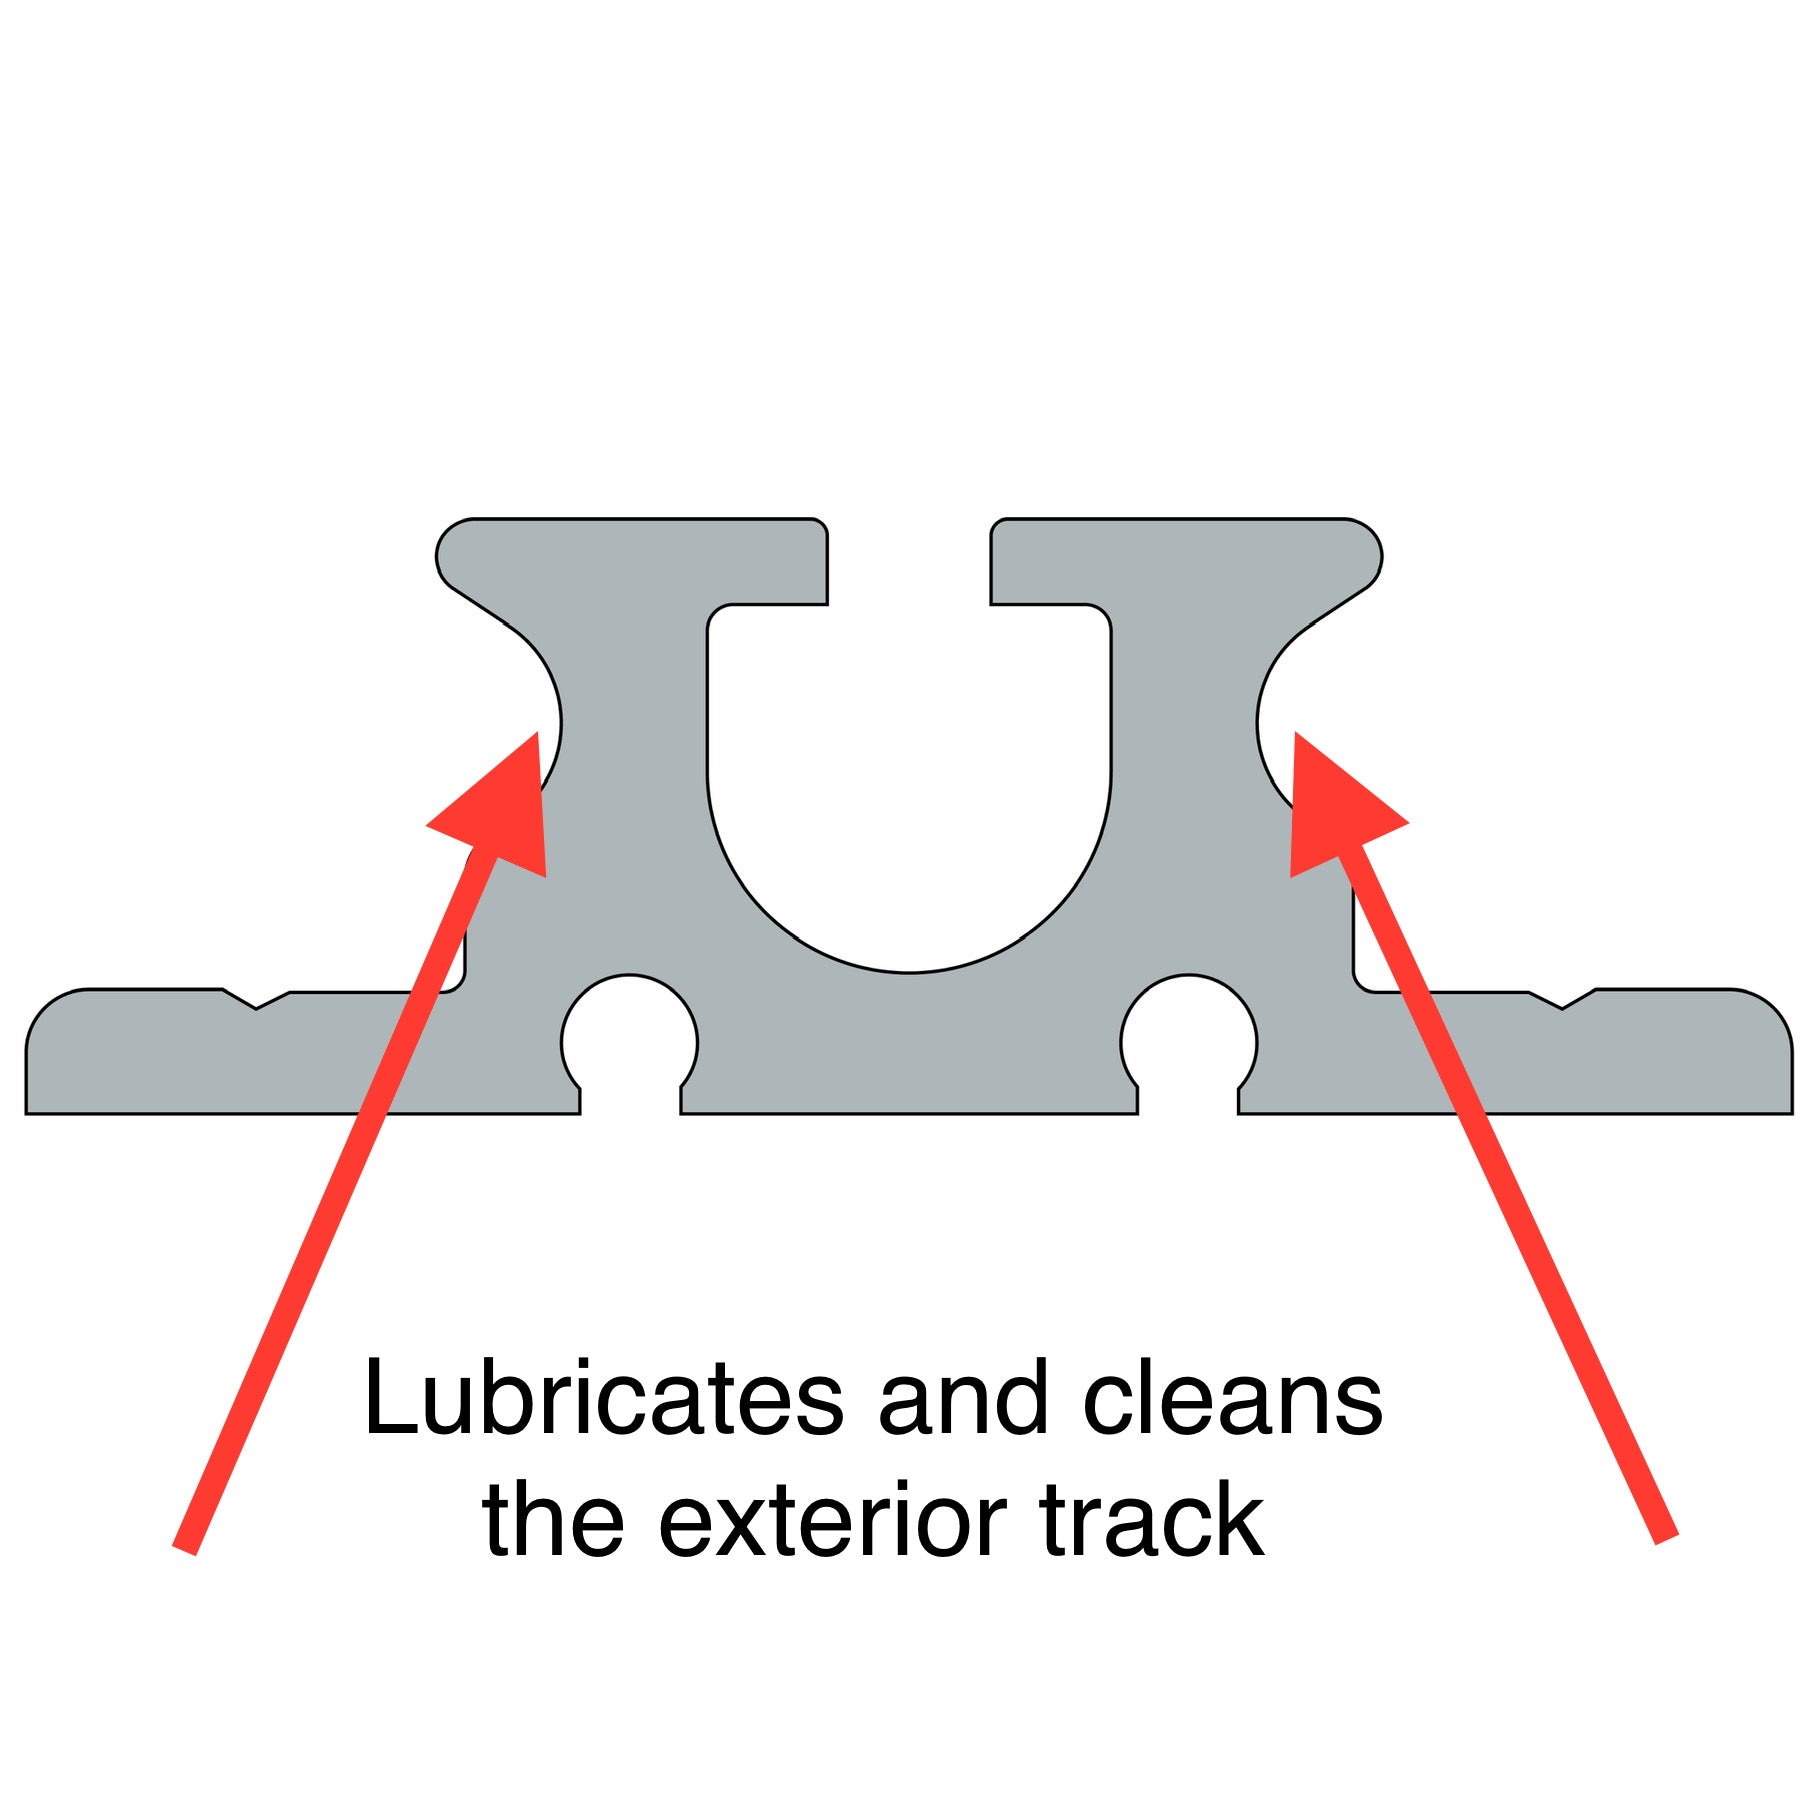 Lubricates and cleans the exterior mast track for sailboat